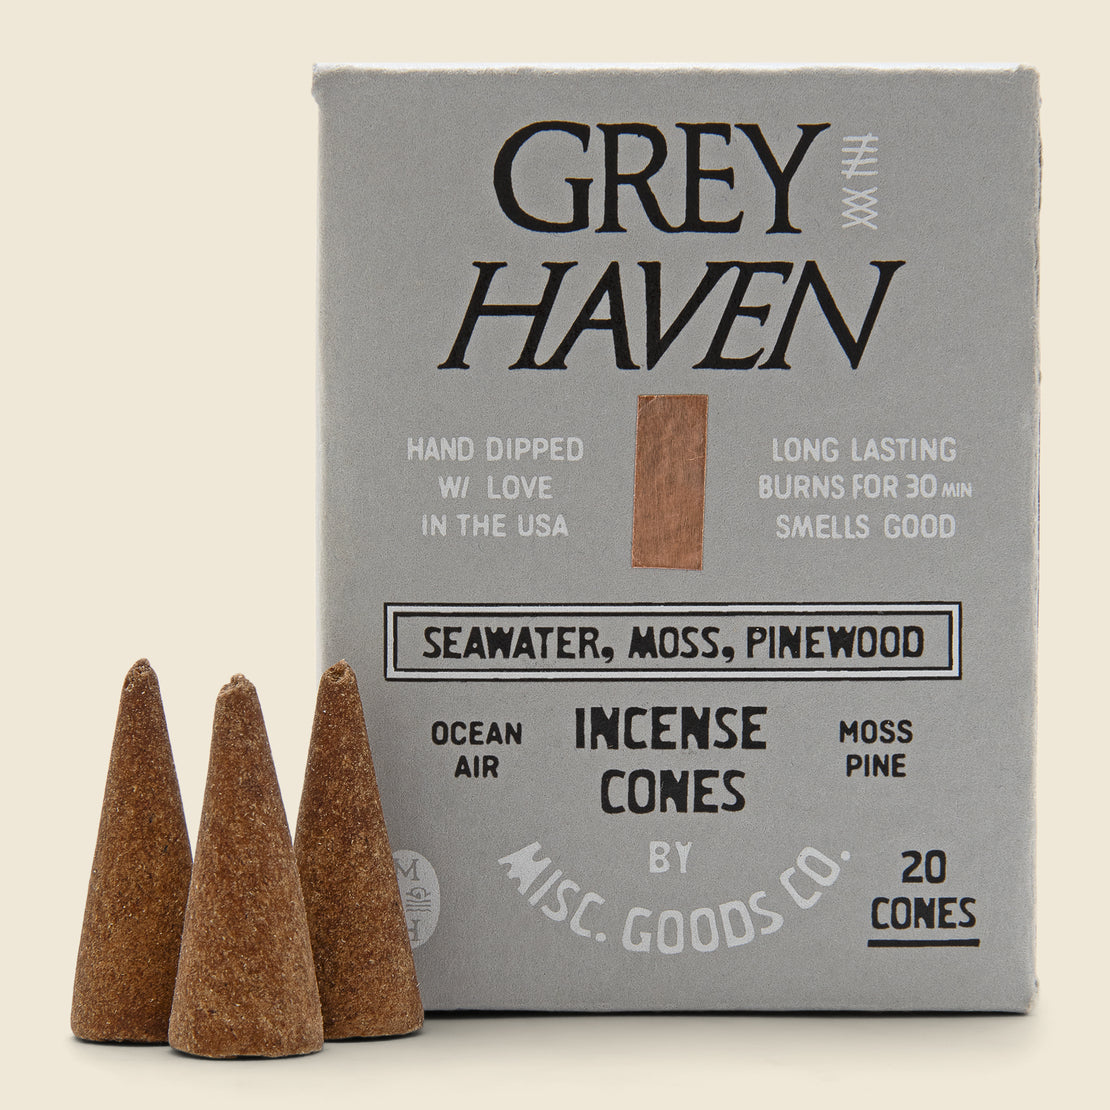 Misc Goods Co. Greyhaven Cone Incense